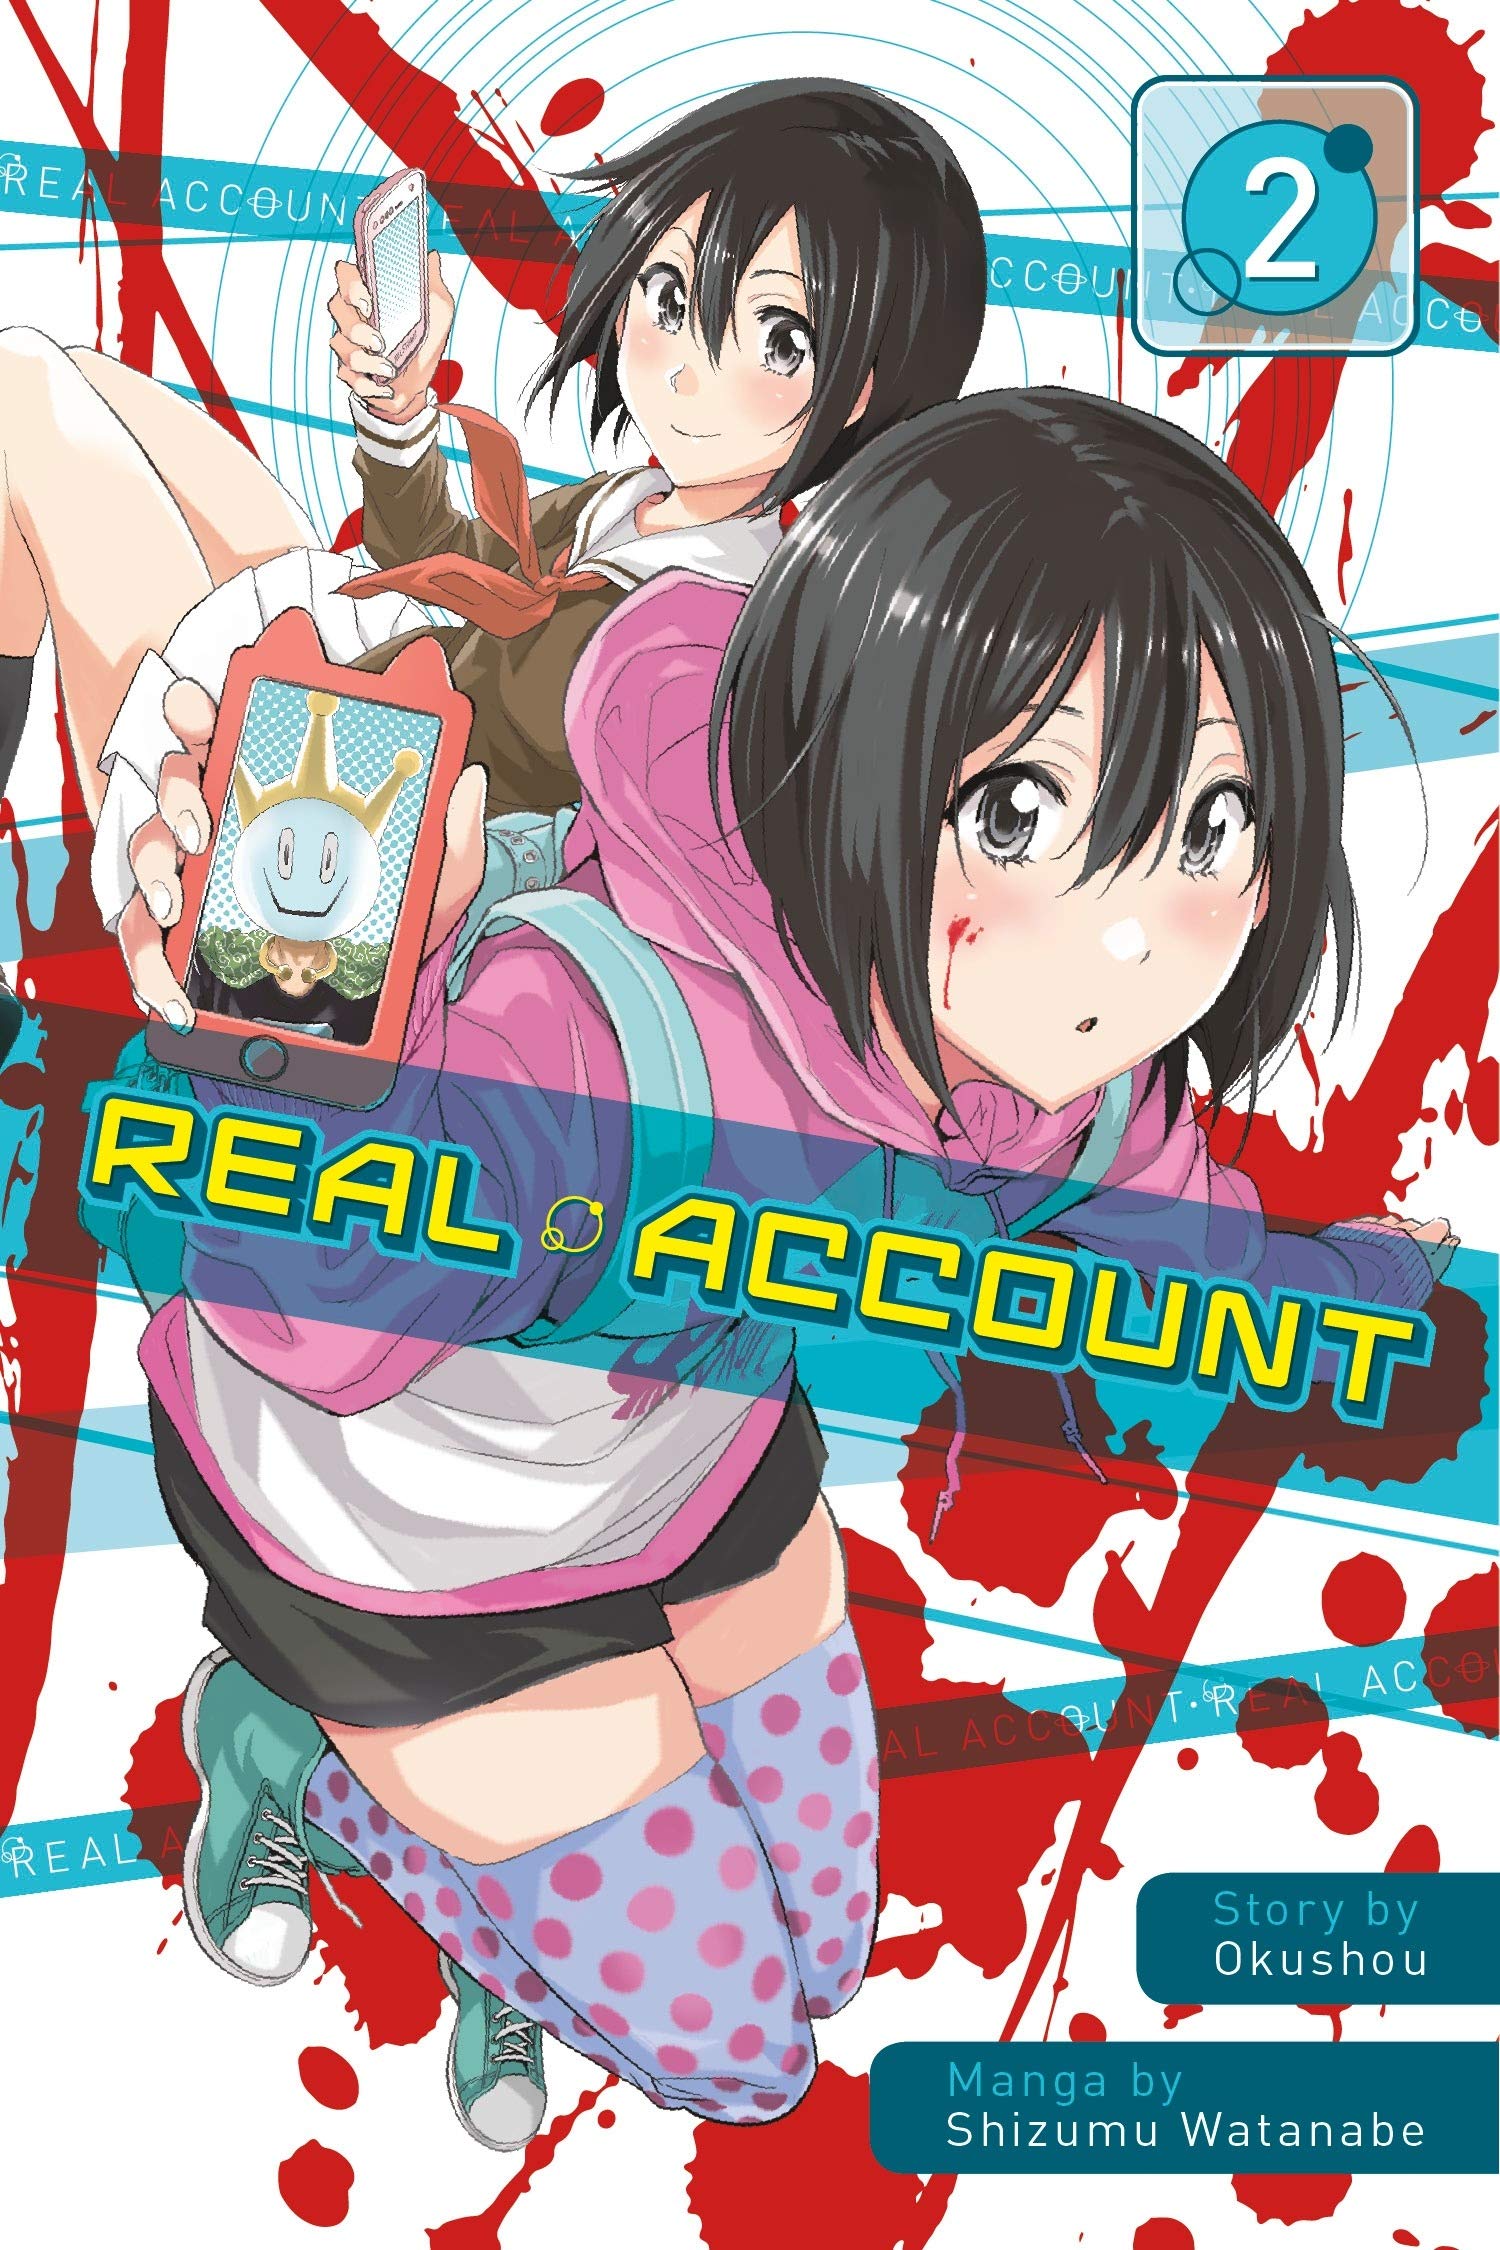 Real Account - Volume 2